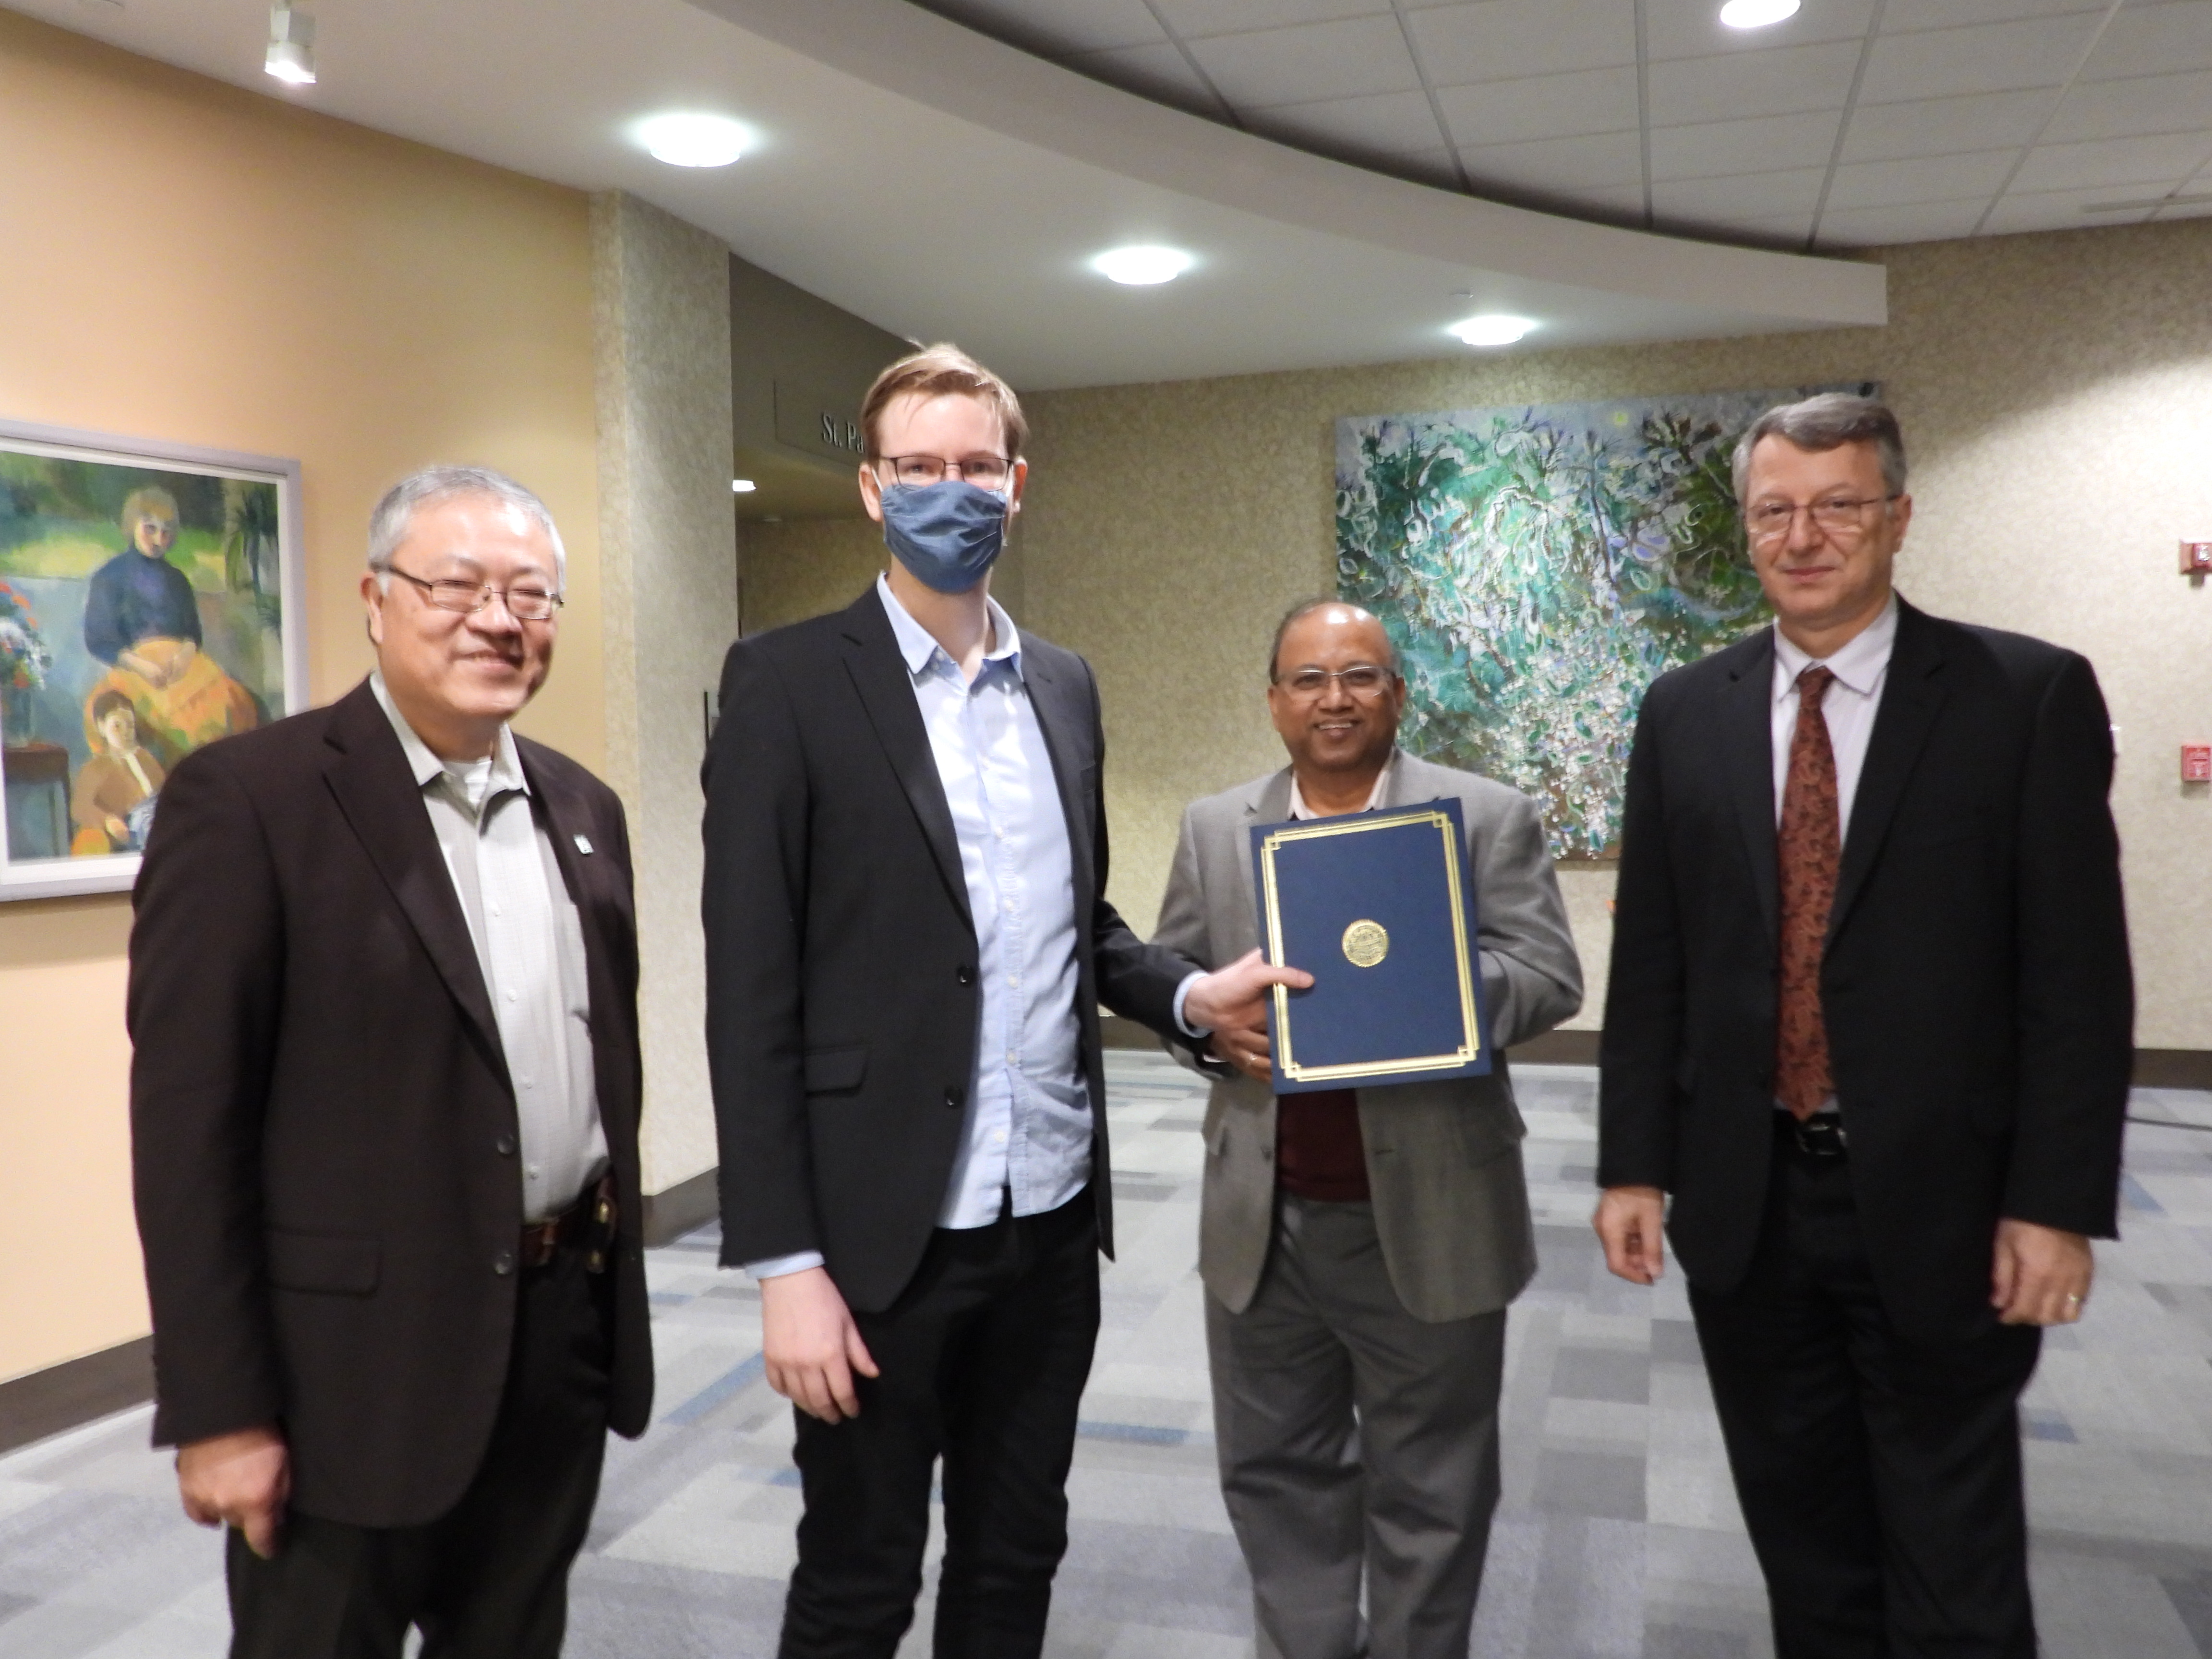 From left to right: Dr. Frank Liou (ISC Interim Director), Simon Thougaard (tied for 2nd place), Dr. Sanjay Madria (ISC Poster Presentation Chair), and Dr. Kamal Khayat (Interim Vice Chancellor for Research and Innovation)